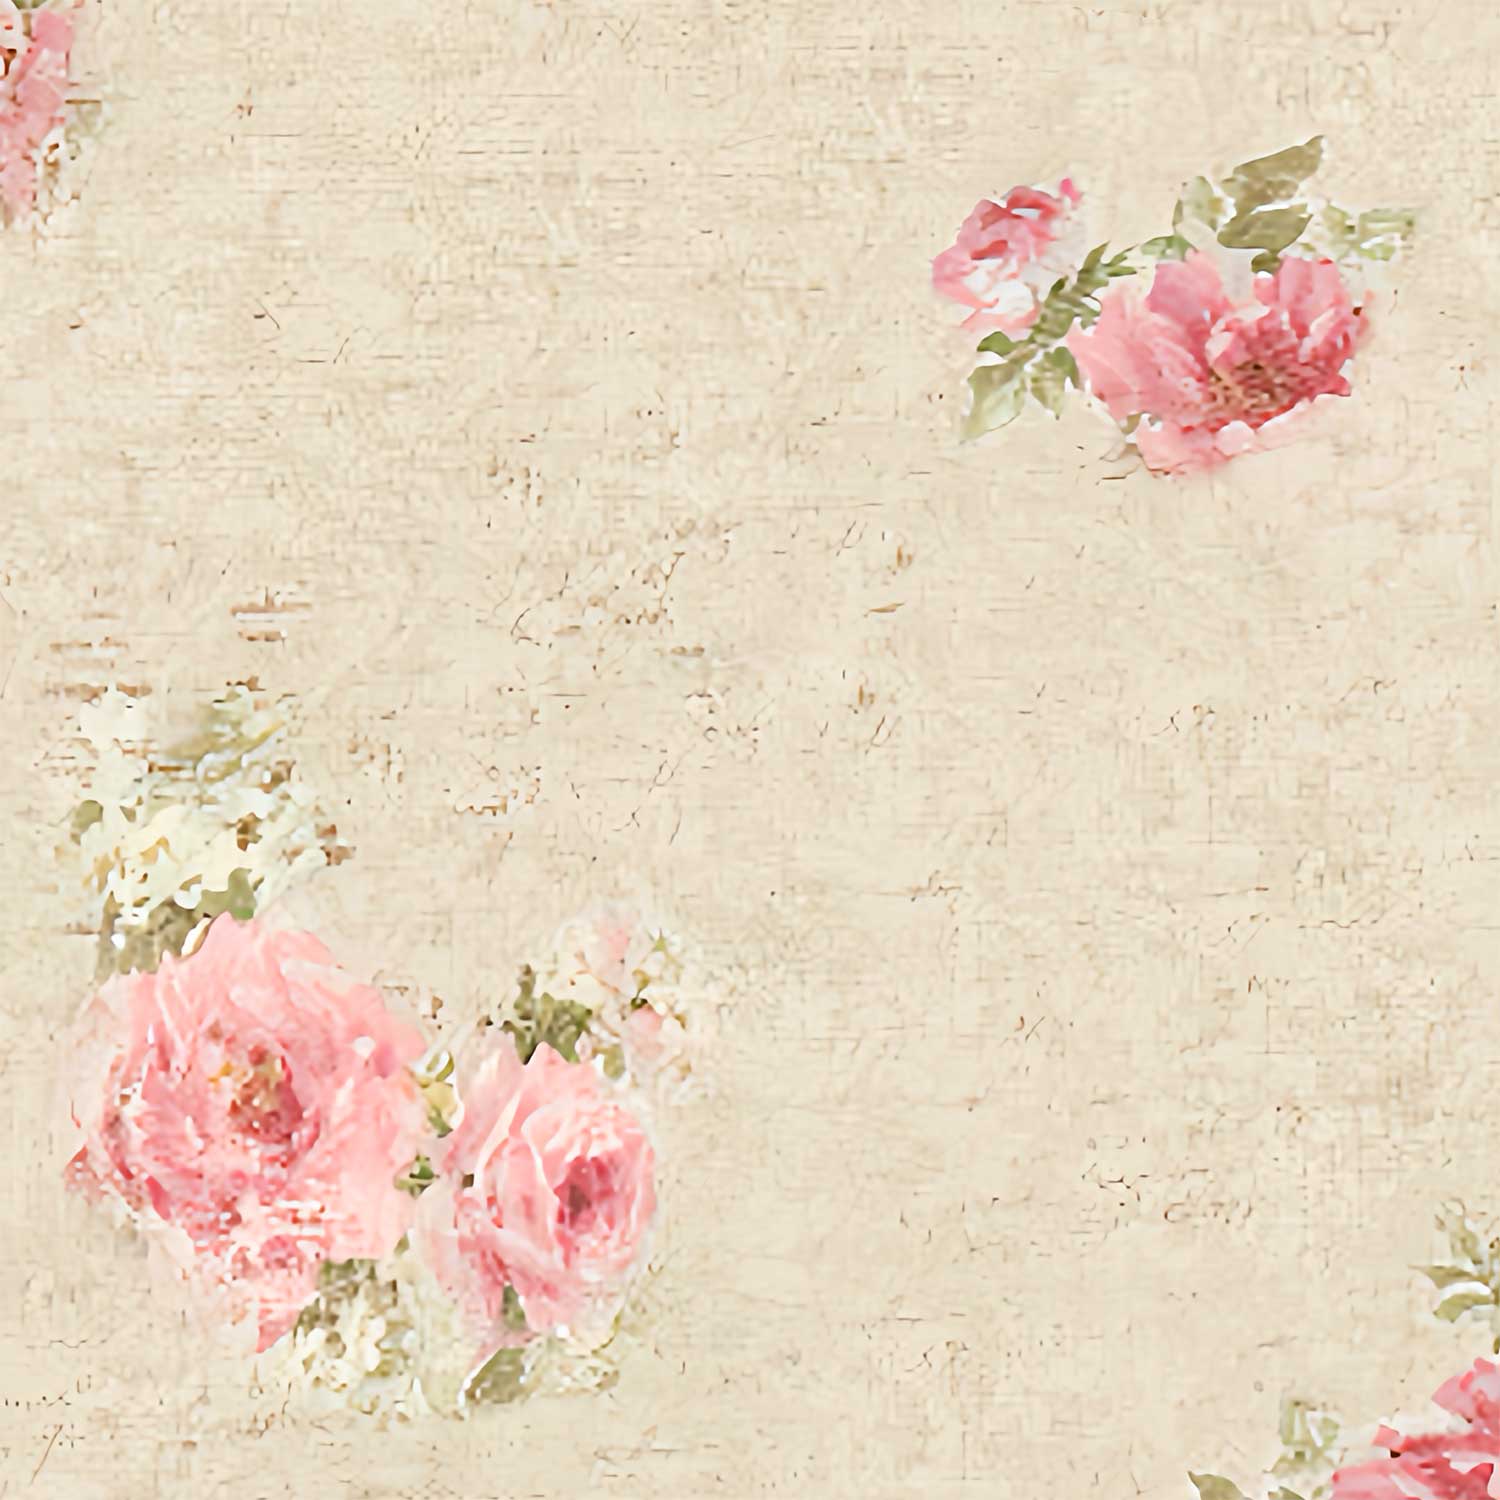 Close-up of shabby chic farmhouse shower curtain with blurred rose floral pattern.